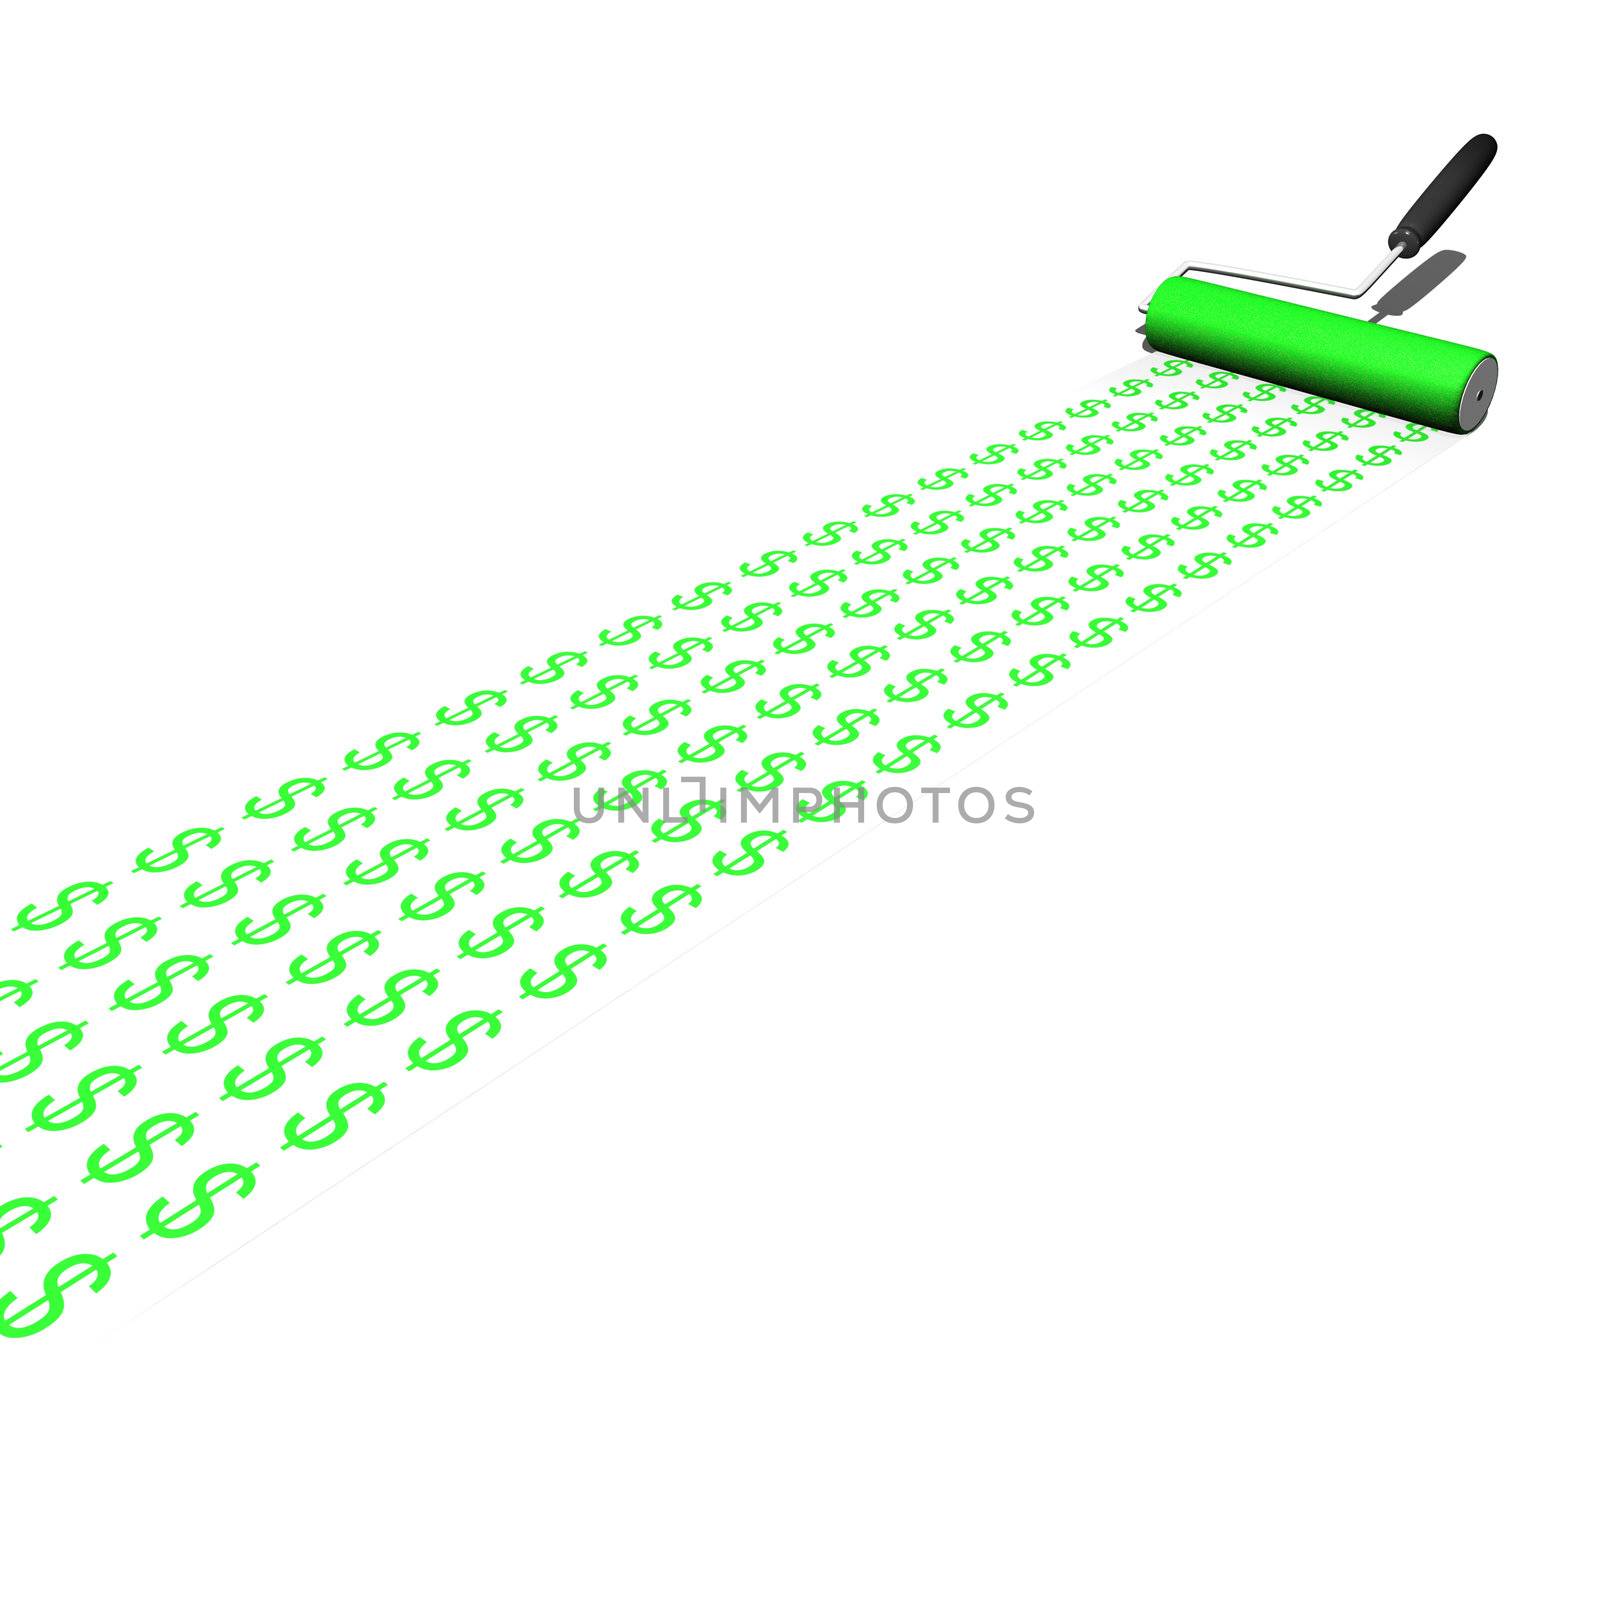 Concept image of dollar signs being painted on by a paint roller.